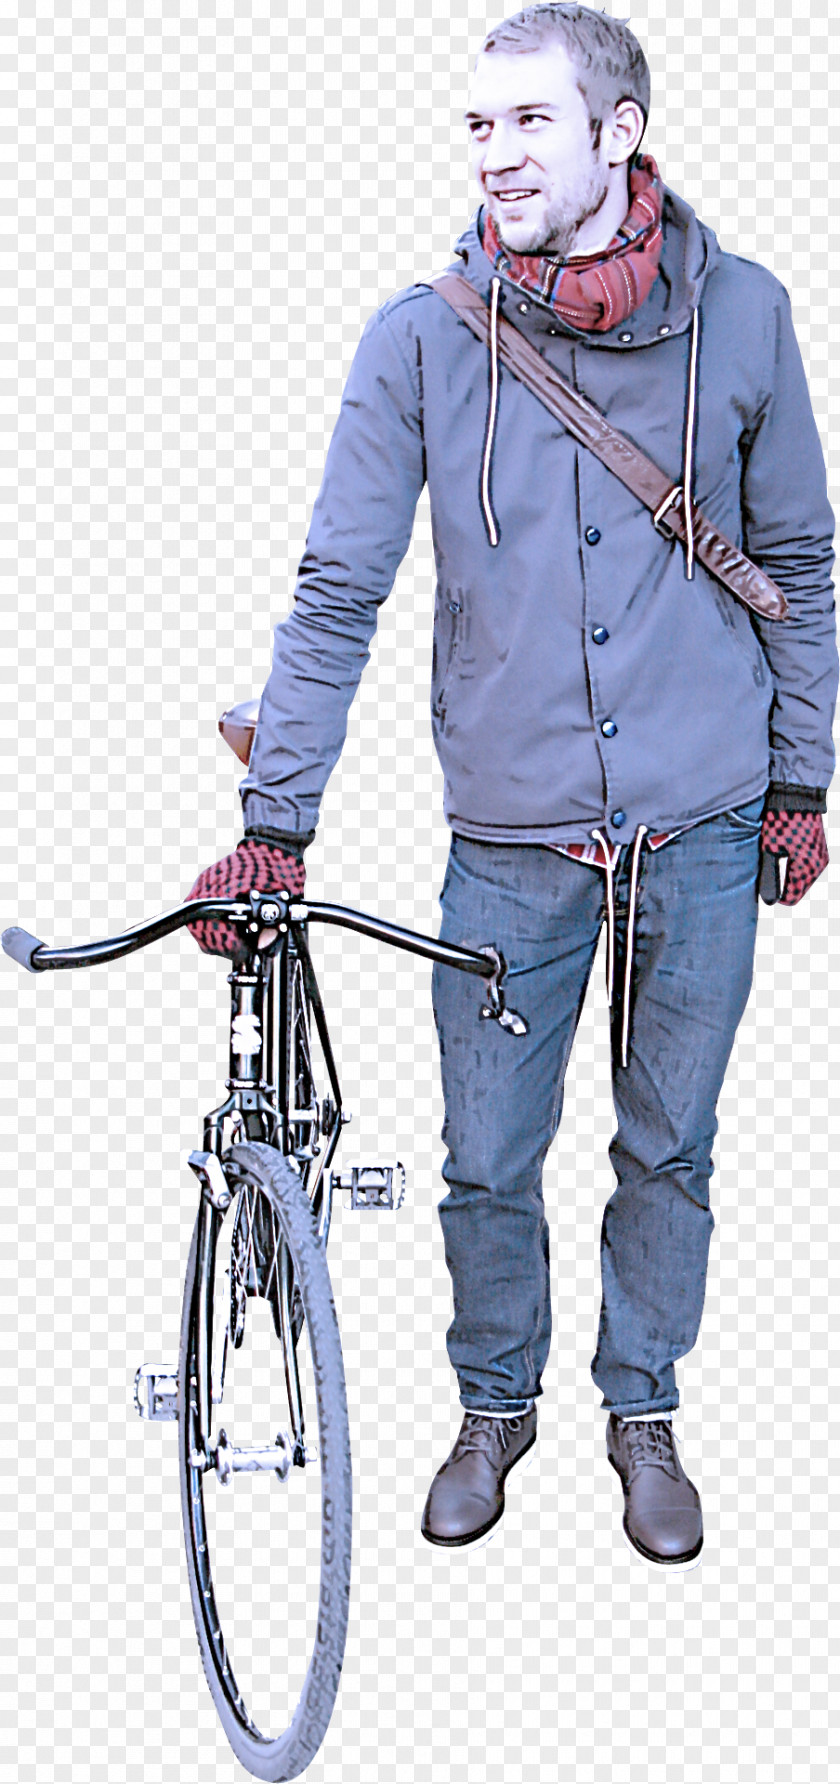 Bicycle Accessory Footwear Part Jeans Wheel Clothing PNG